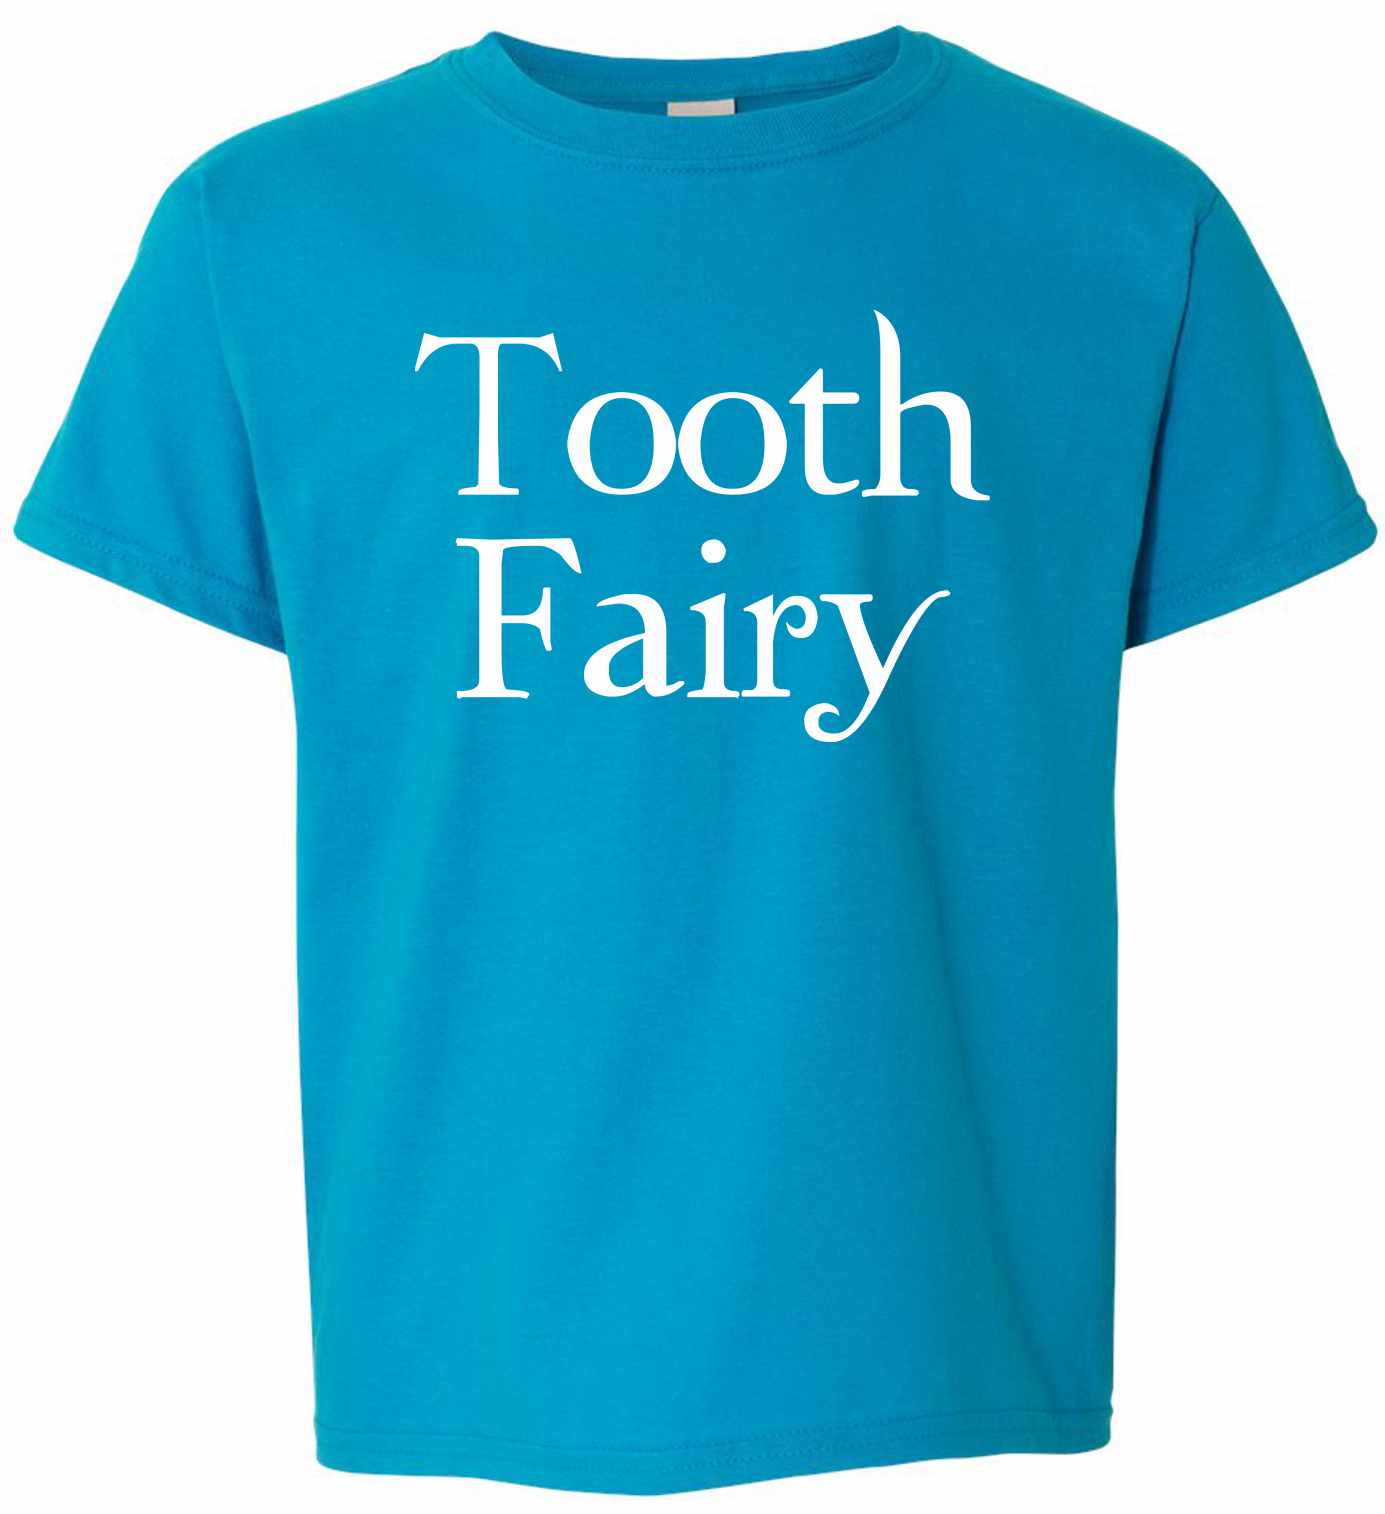 Tooth Fairy on Kids T-Shirt